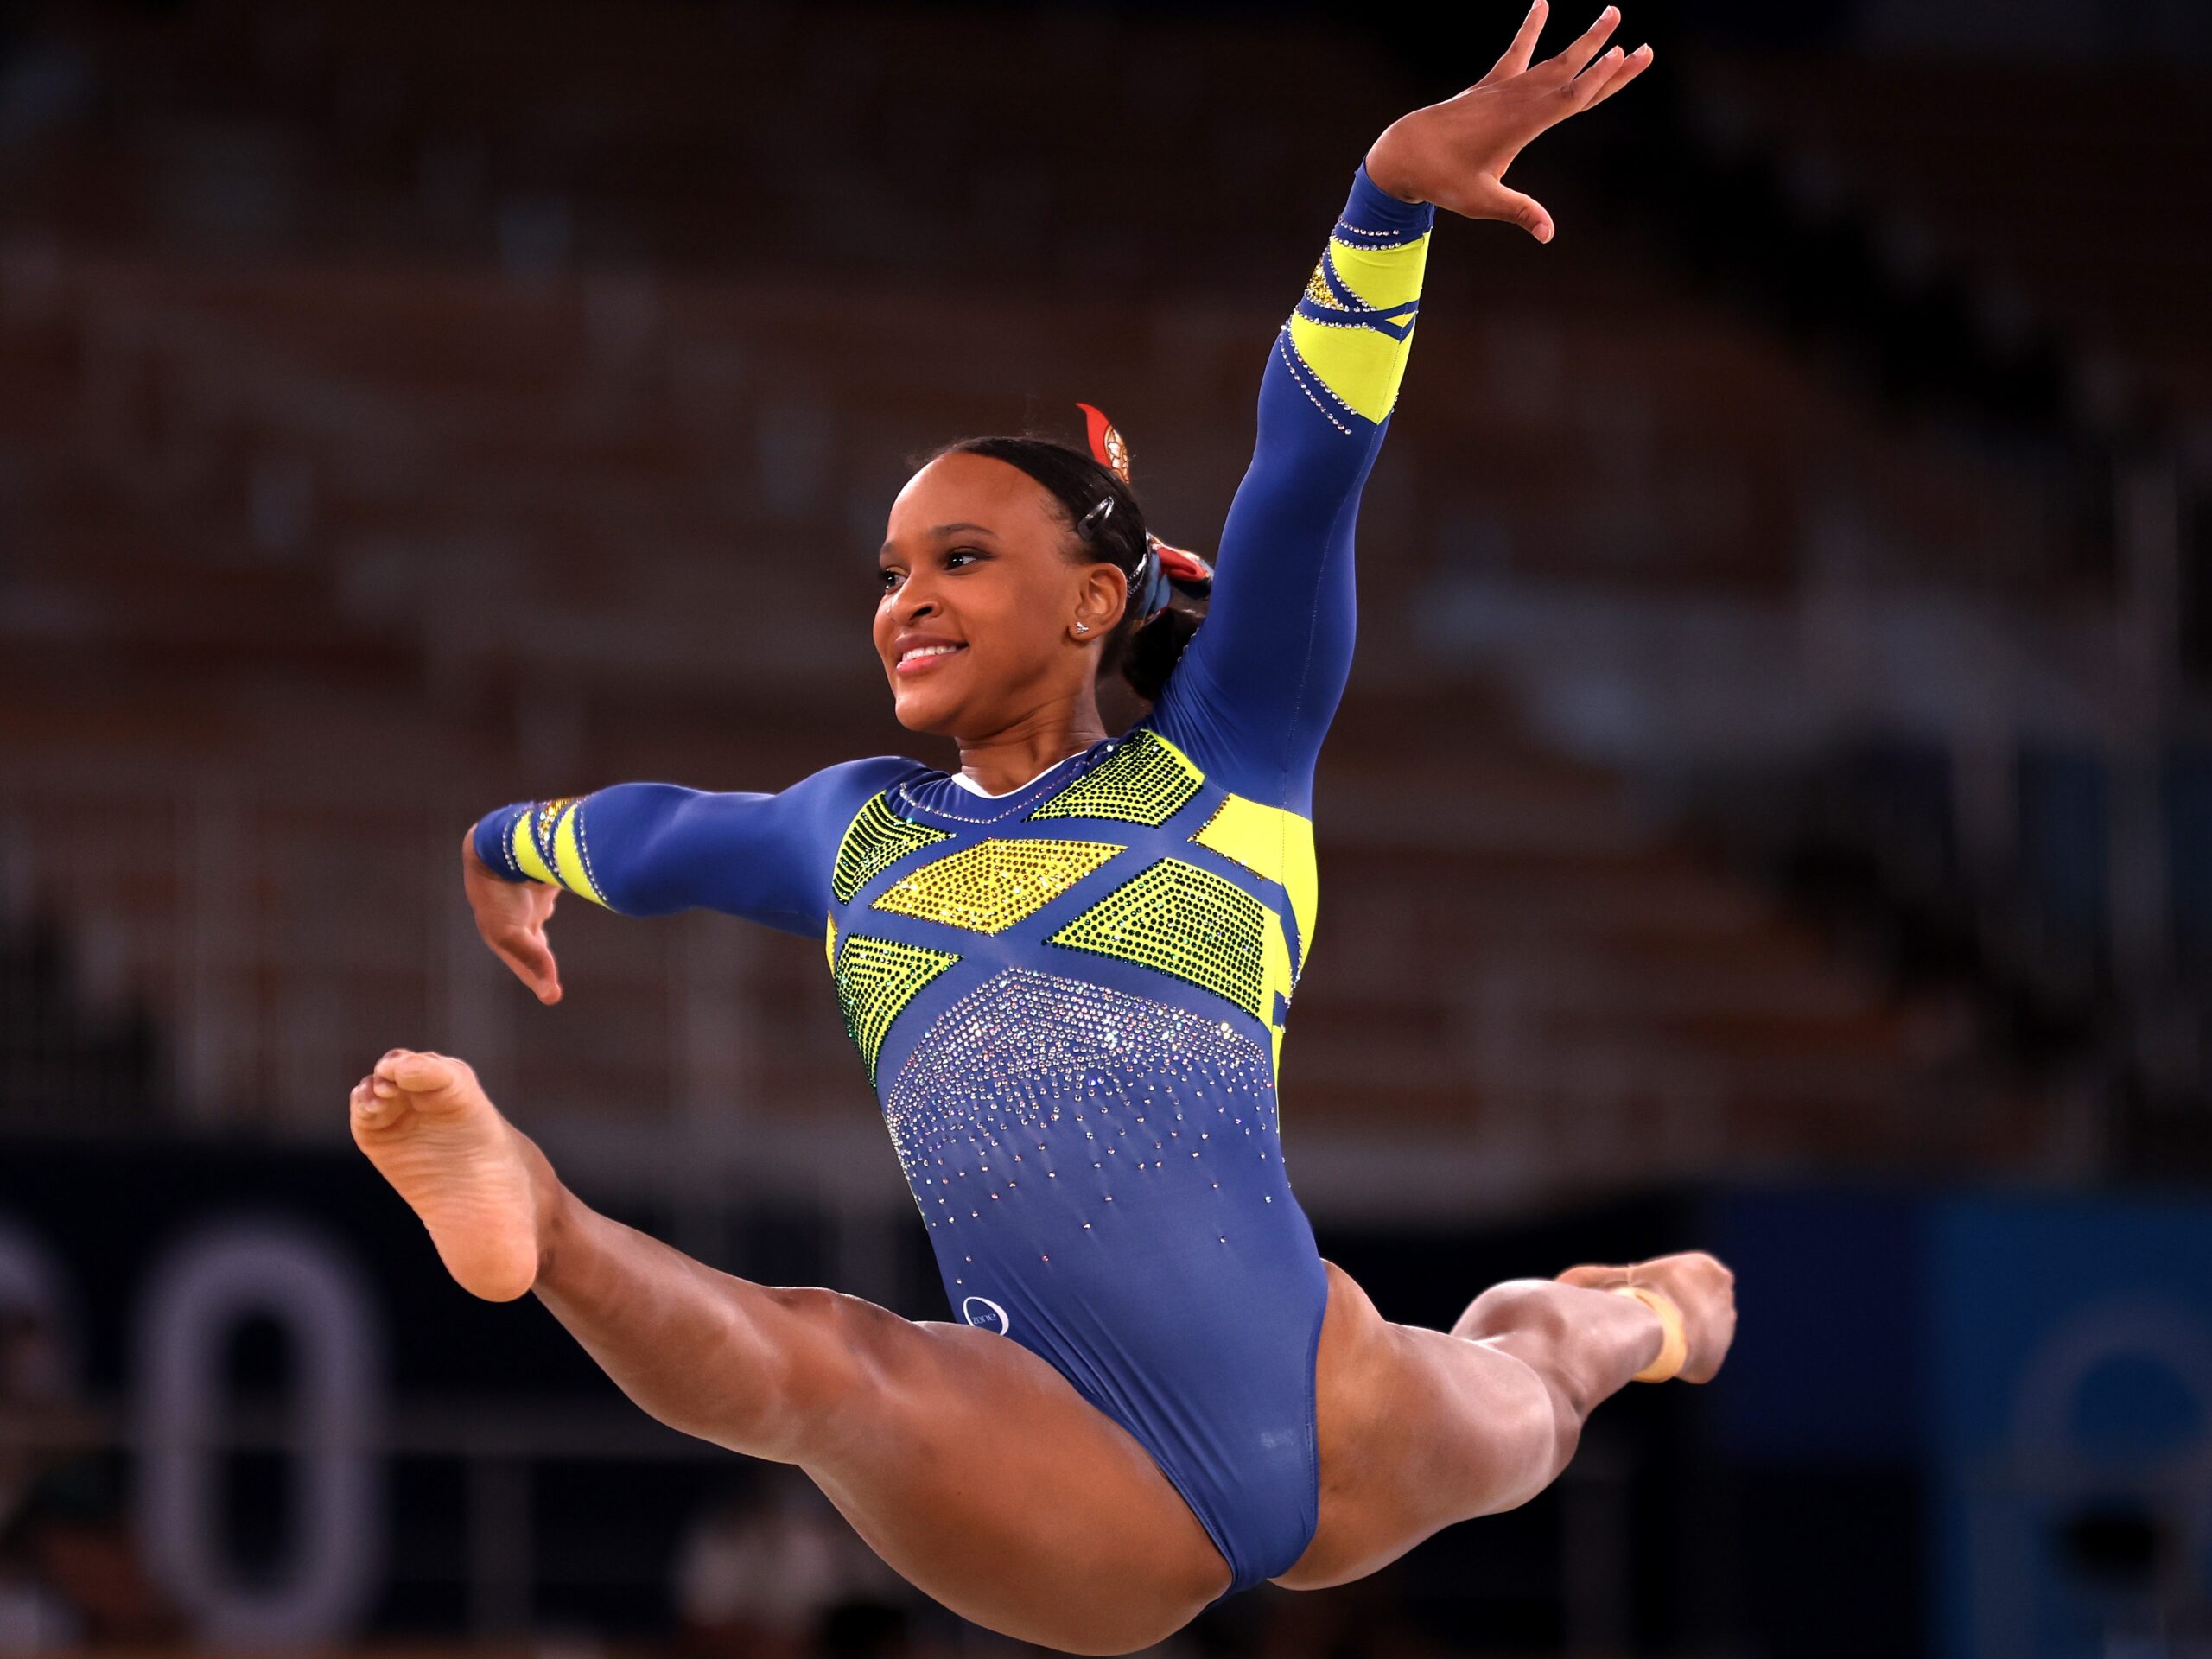 Rebeca Andrade Is The First Brazilian To Win An Olympic Medal In Women’s Artistic Gymnastics